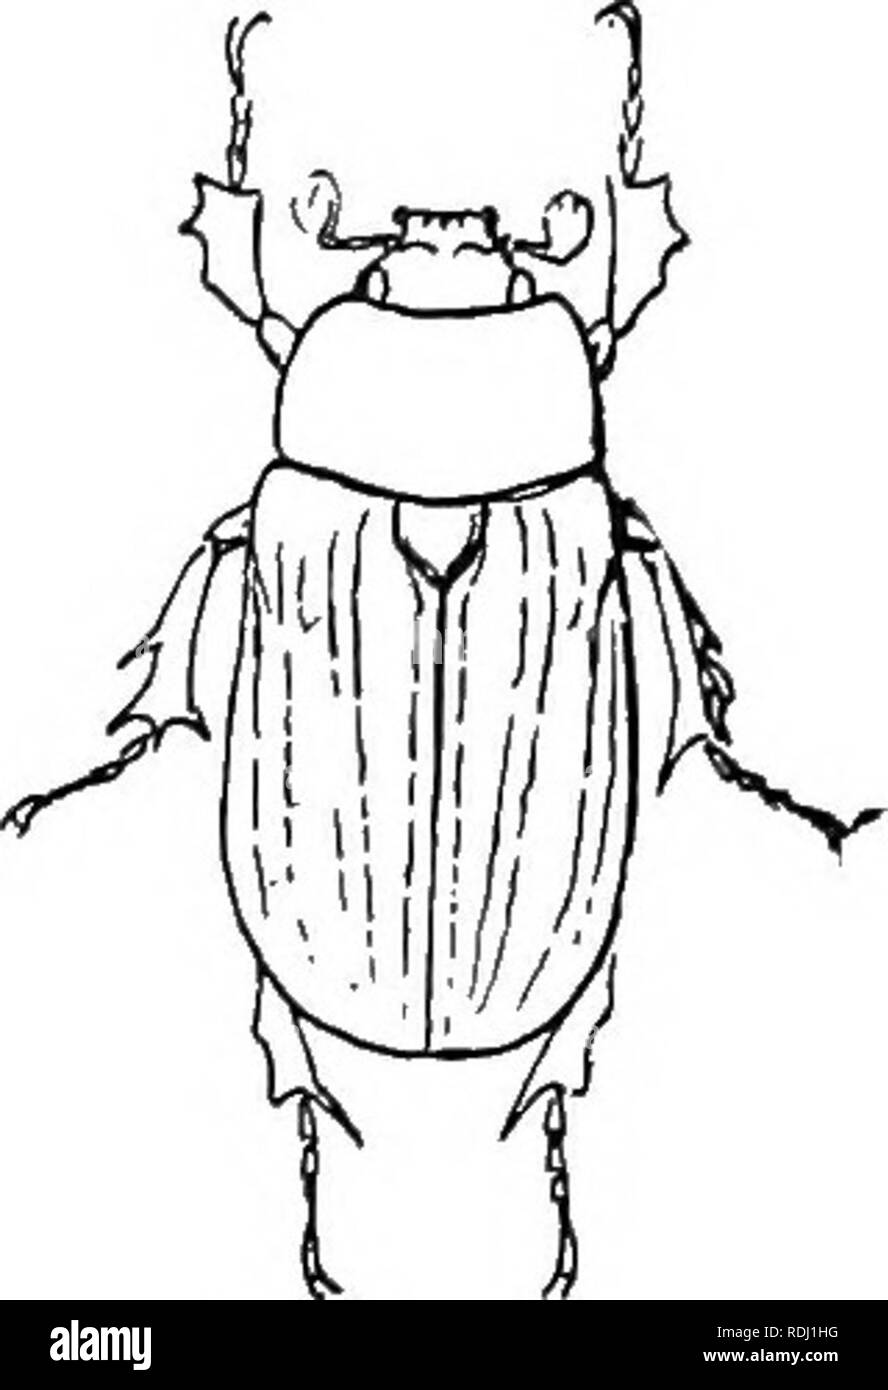 . An illustrated descriptive catalogue of the coleoptera or beetles (exclusive of the Rhynchophora) known to occur in Indiana : with bibliography and descriptions of new species . Beetles. 992 FAMILY L. HCAHAB/EIDiE. 1852 (5871). LiOYKUs relictus Say, Journ. Phil. Acad. Nat. S ,194; ibid. II, 296. Oblong, very robust. Piceous black, shining. Trans- verse carina of head interrupted at middle; elypeus with two teeth. Thorax strongly convex, hind angles broadly rounded, surface finely and sparsely punc- tured. Elytra with rather fine punctures, those of center of disk arranged in three double row Stock Photo